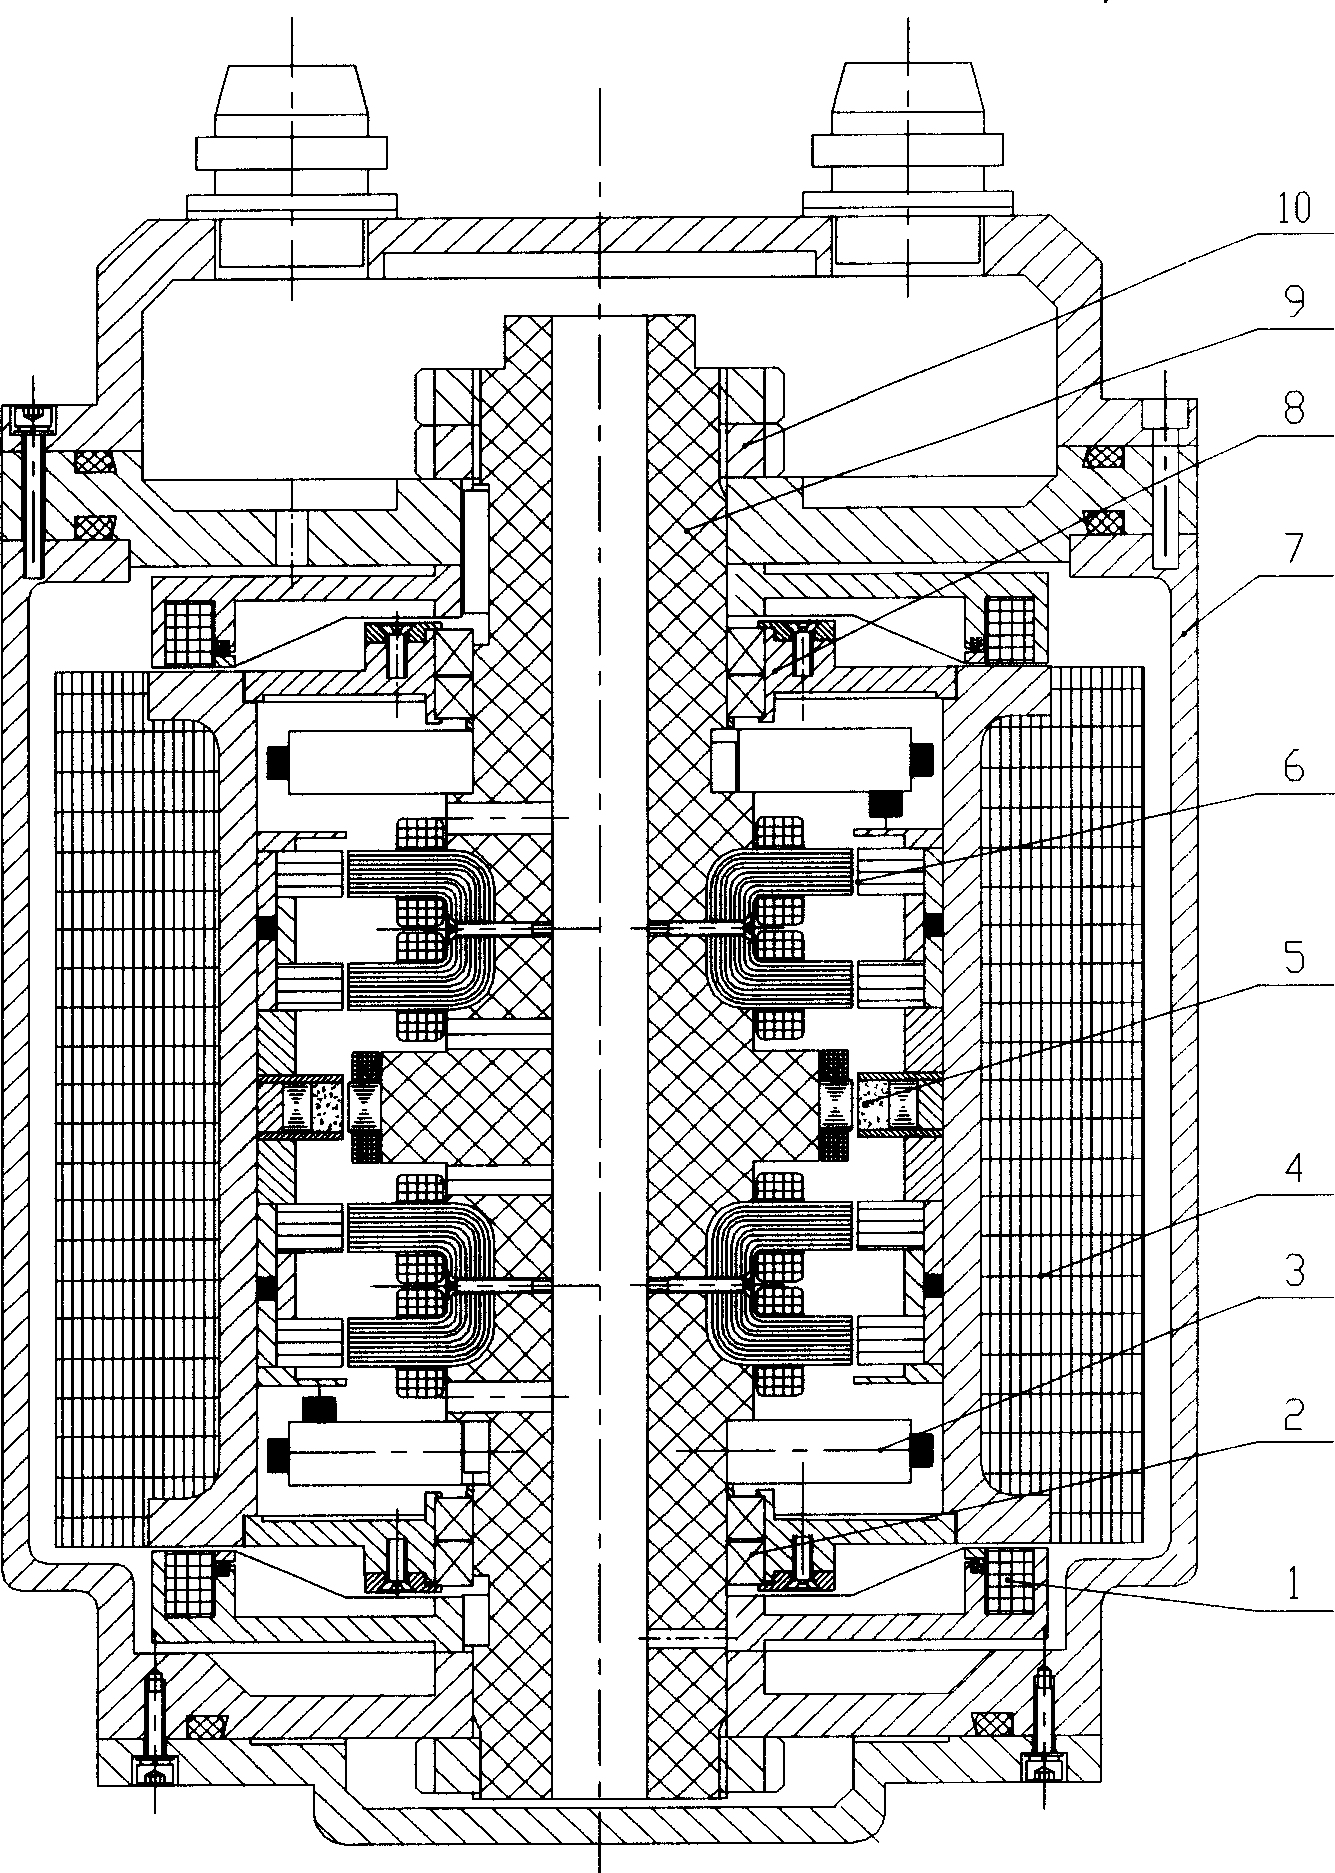 Energy-storing flywheel system with magnetic suspension for spacecraft